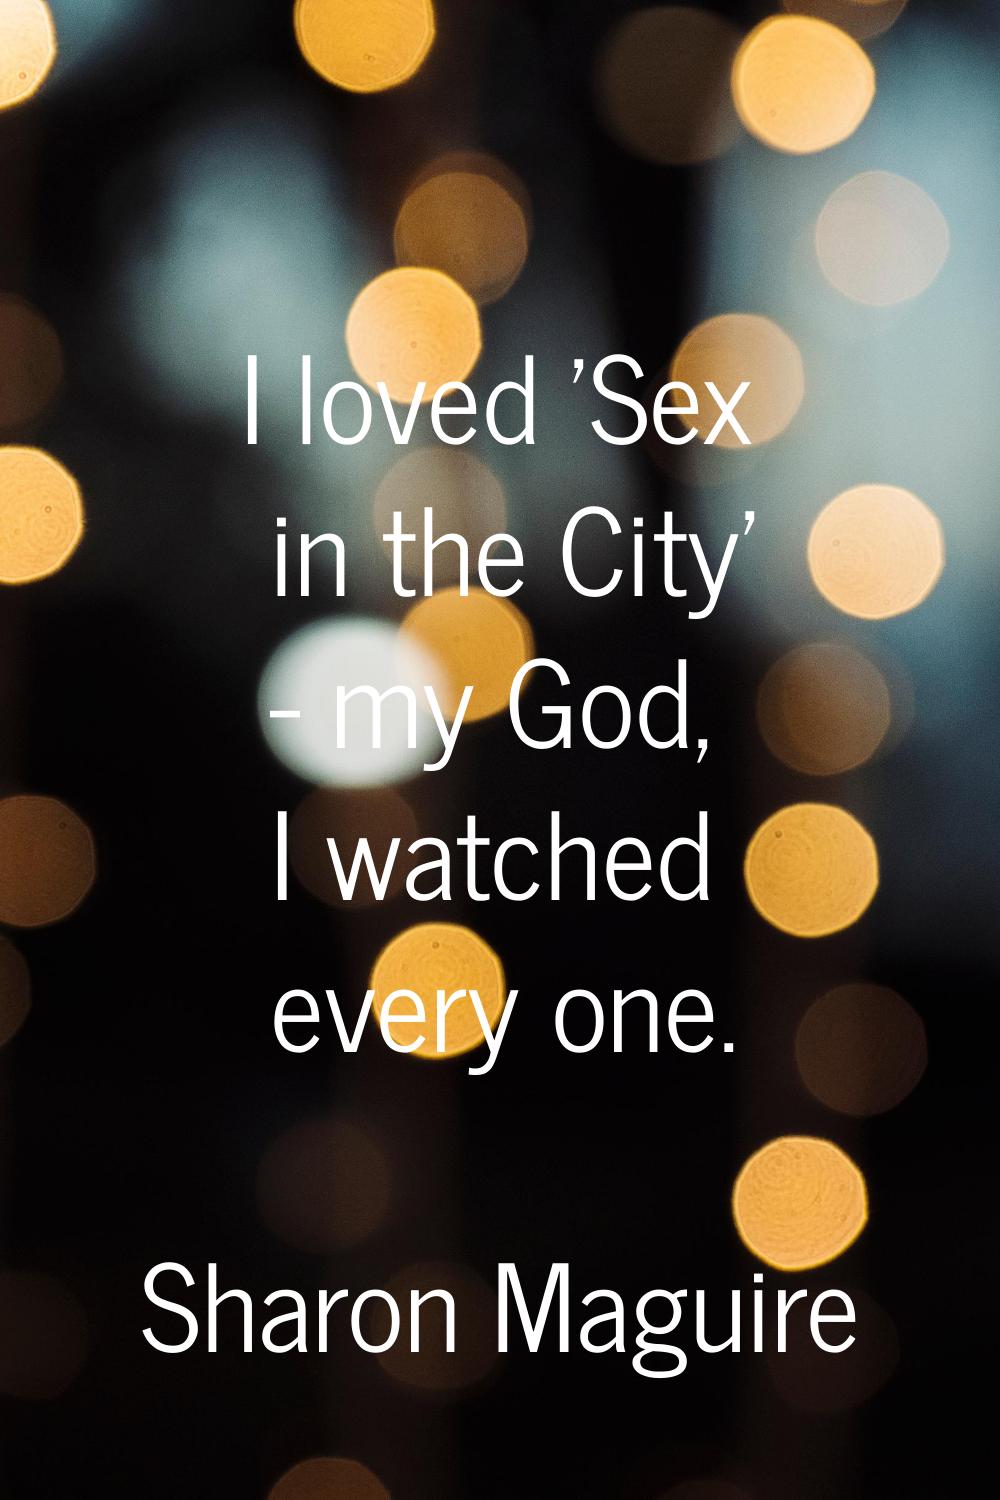 I loved 'Sex in the City' - my God, I watched every one.